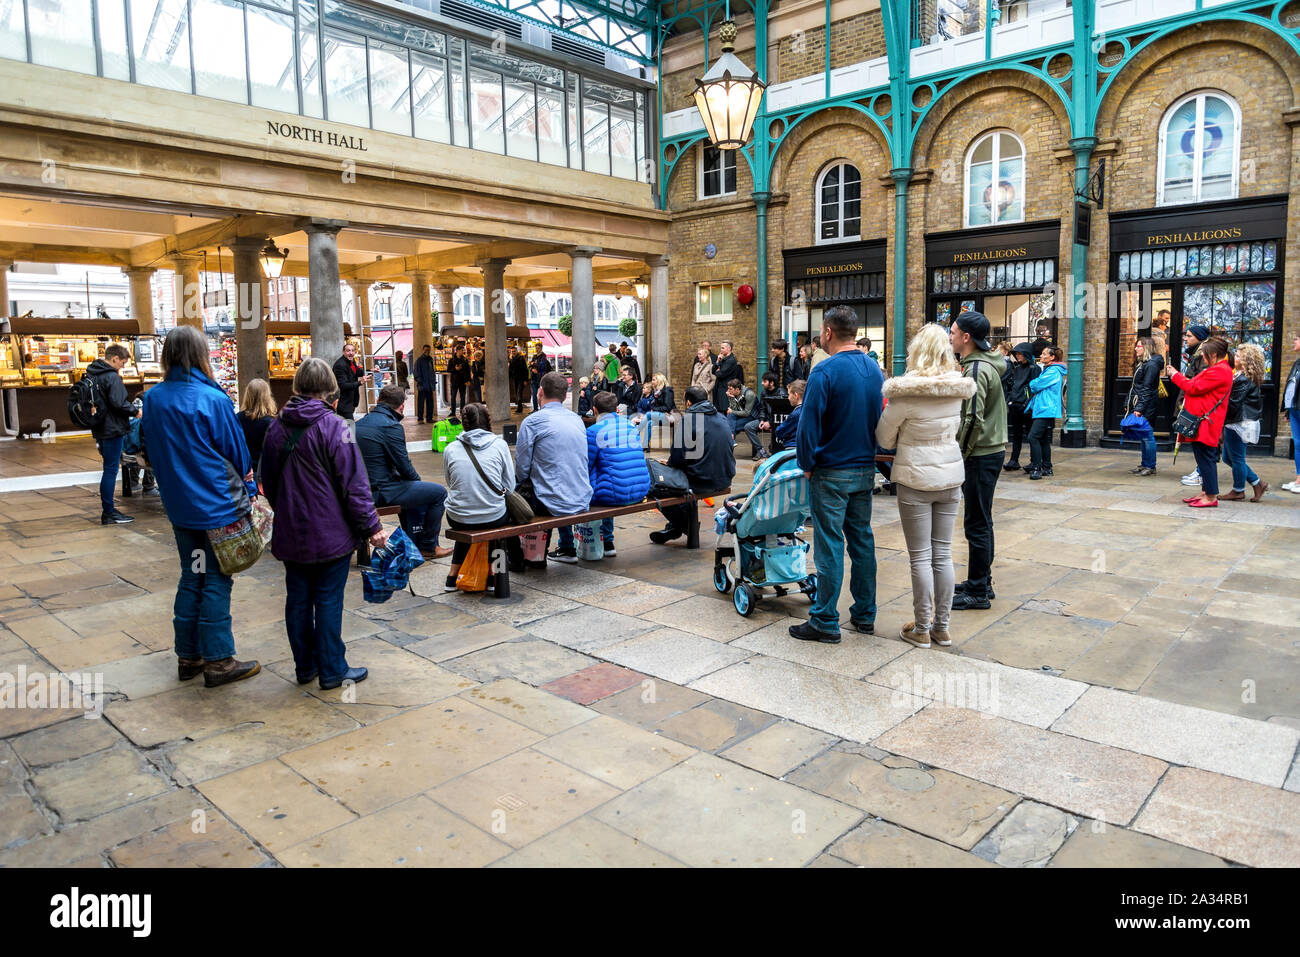 Tourists and visitors watch a street performance in Covent Garden shopping area, London, United Kingdom Stock Photo